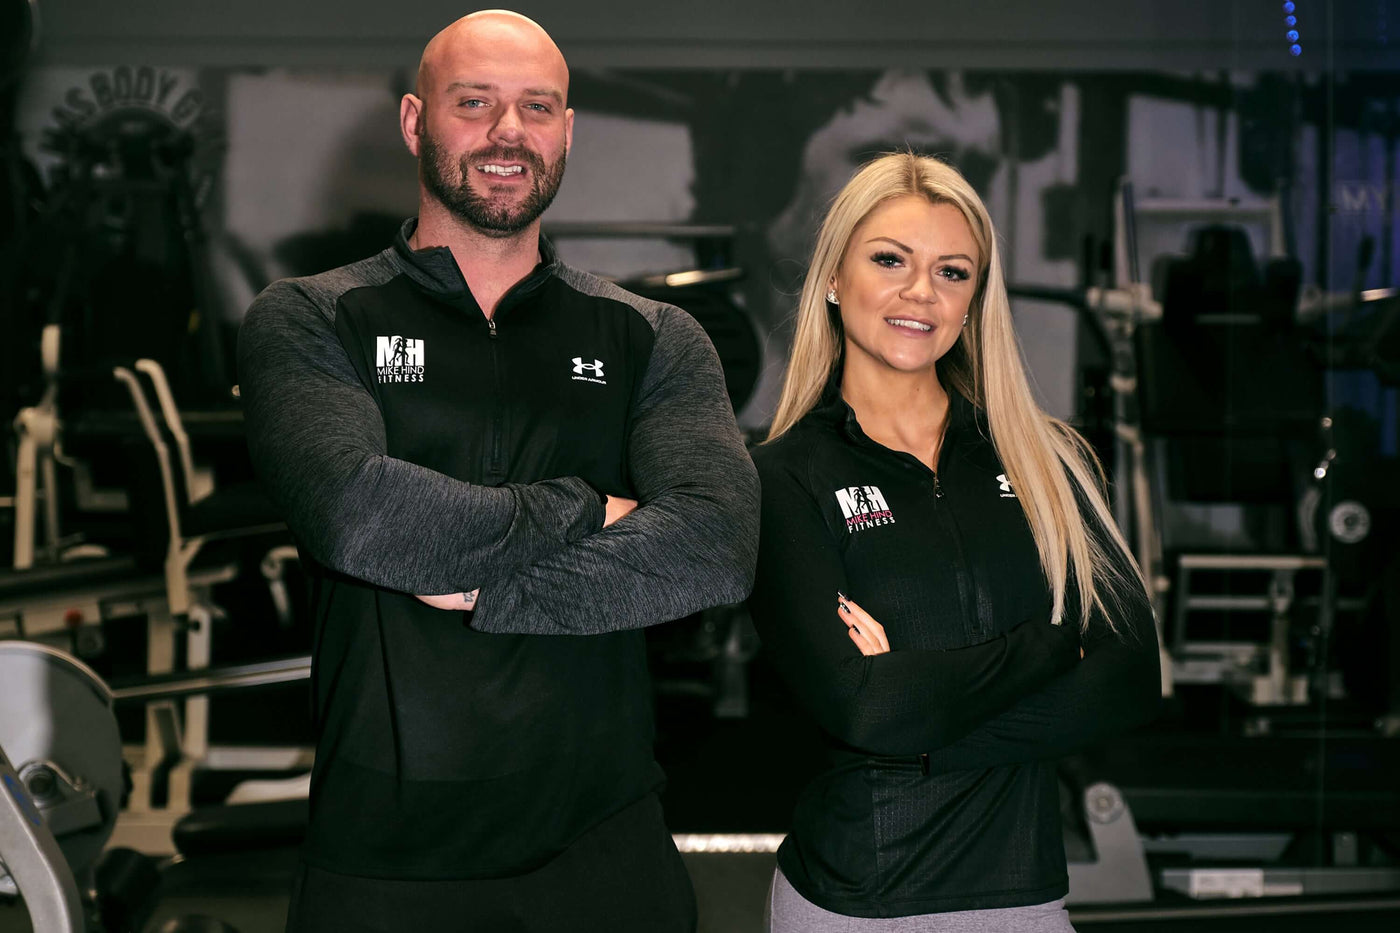 Coaches Mike Hind MBE and Ashleigh Sives Jackson posing at Mas Body Gym Middlesbrough Teesside best gym